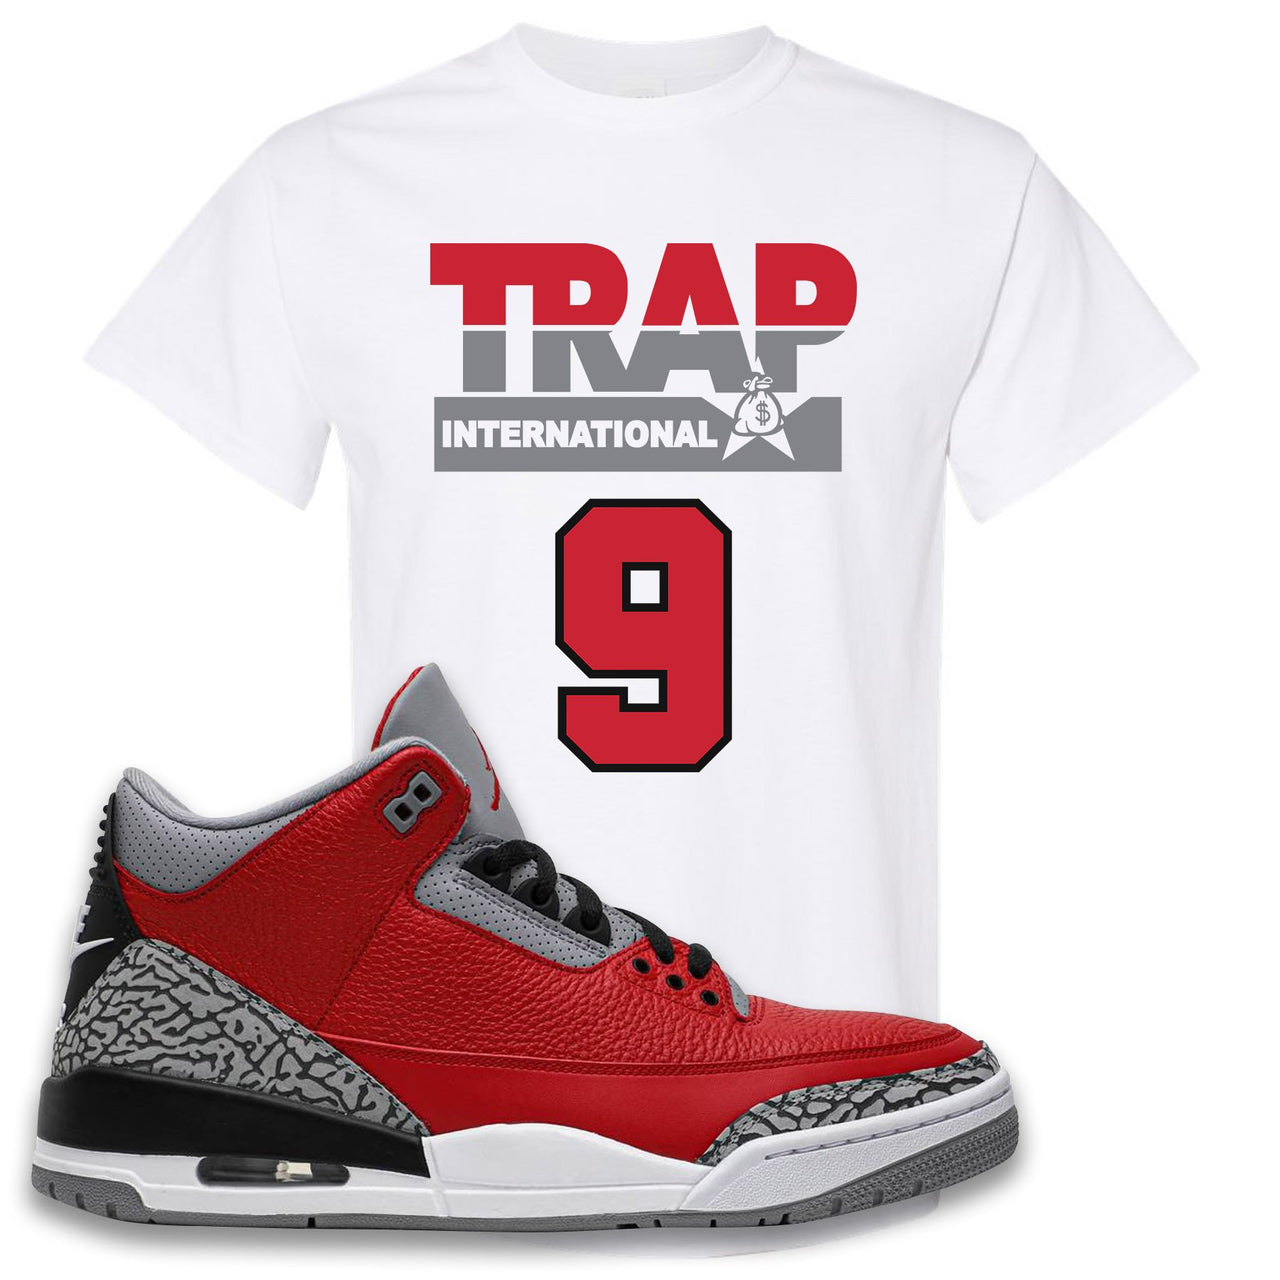 Jordan 3 Red Cement Chicago All-Star Sneaker White T Shirt | Tees to match Jordan 3 All Star Red Cement Shoes | Trap International